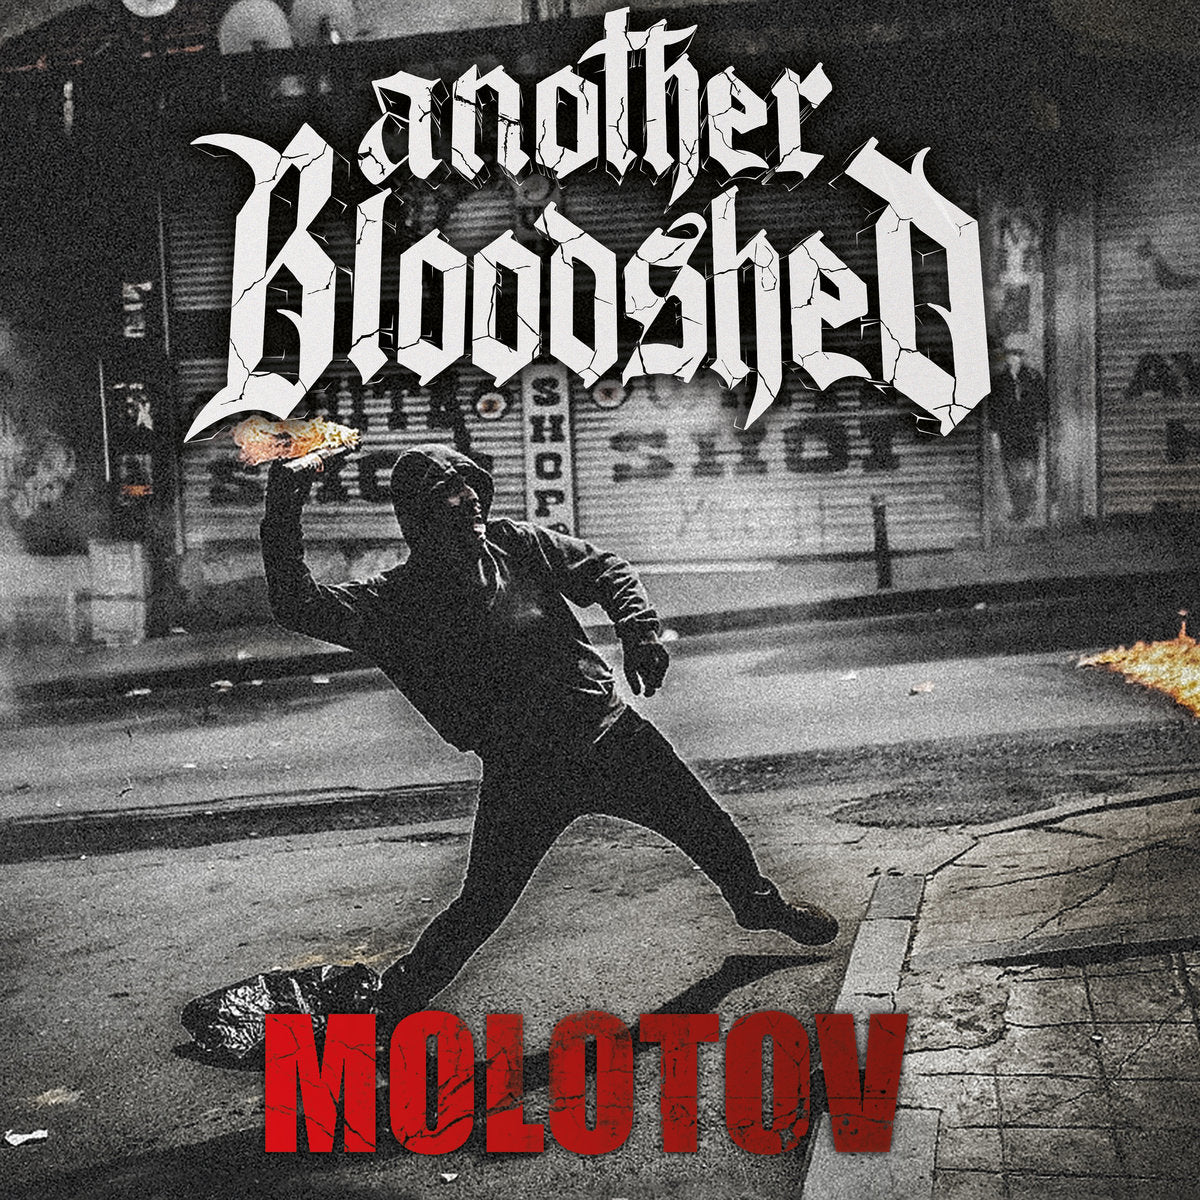 Another Bloodshed "Molotov" CD